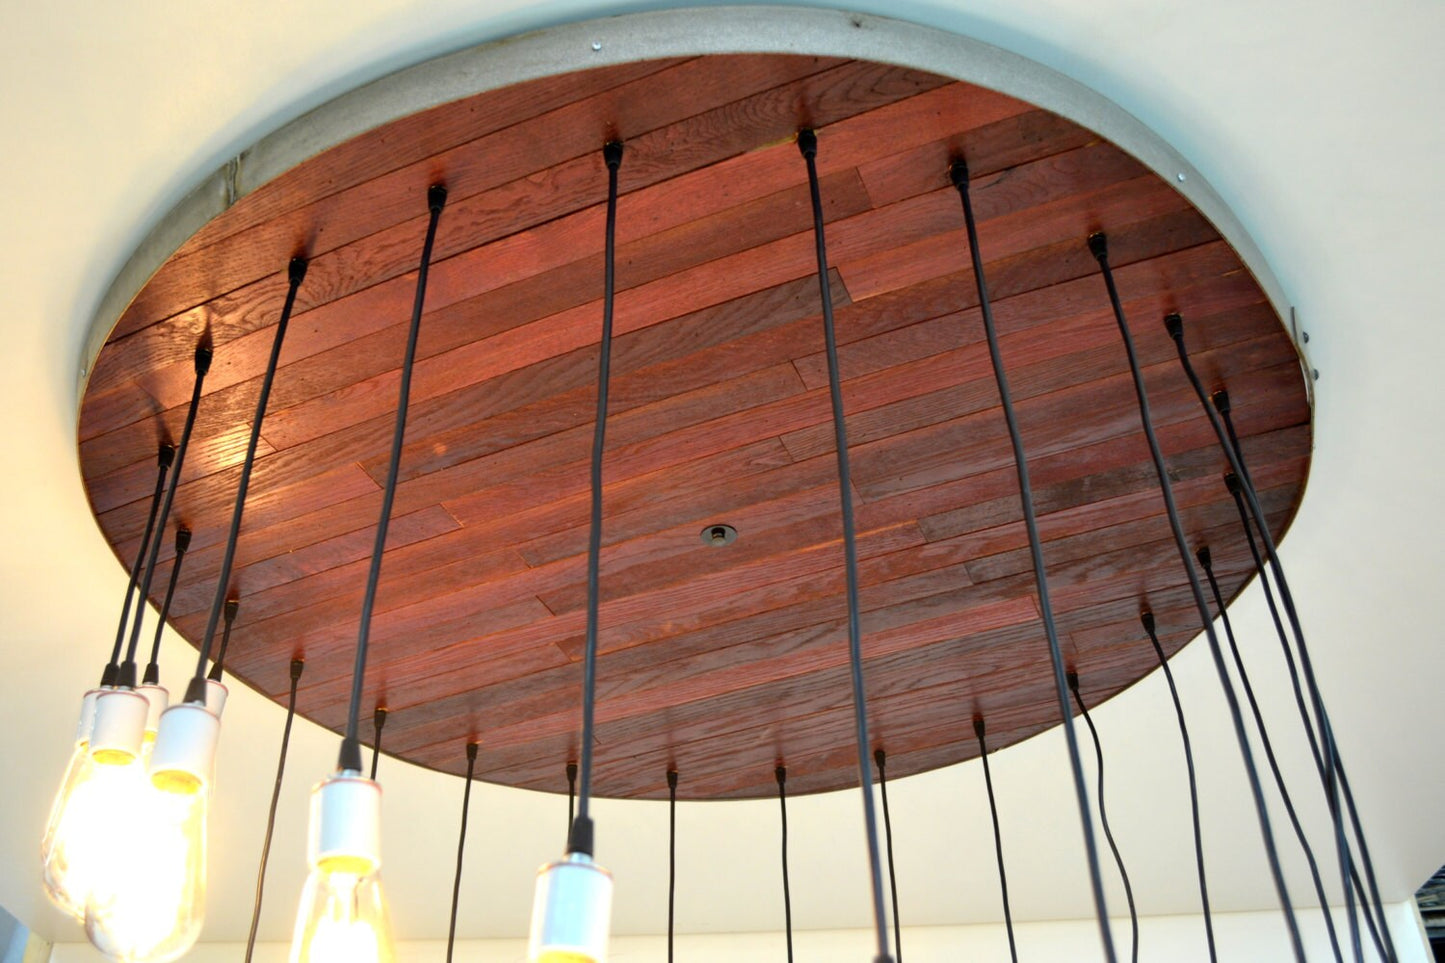 Giant Wine Barrel Chandelier - Prodigious - Retired California Cabernet and Syrah Cask Oak. 100% Recycled!